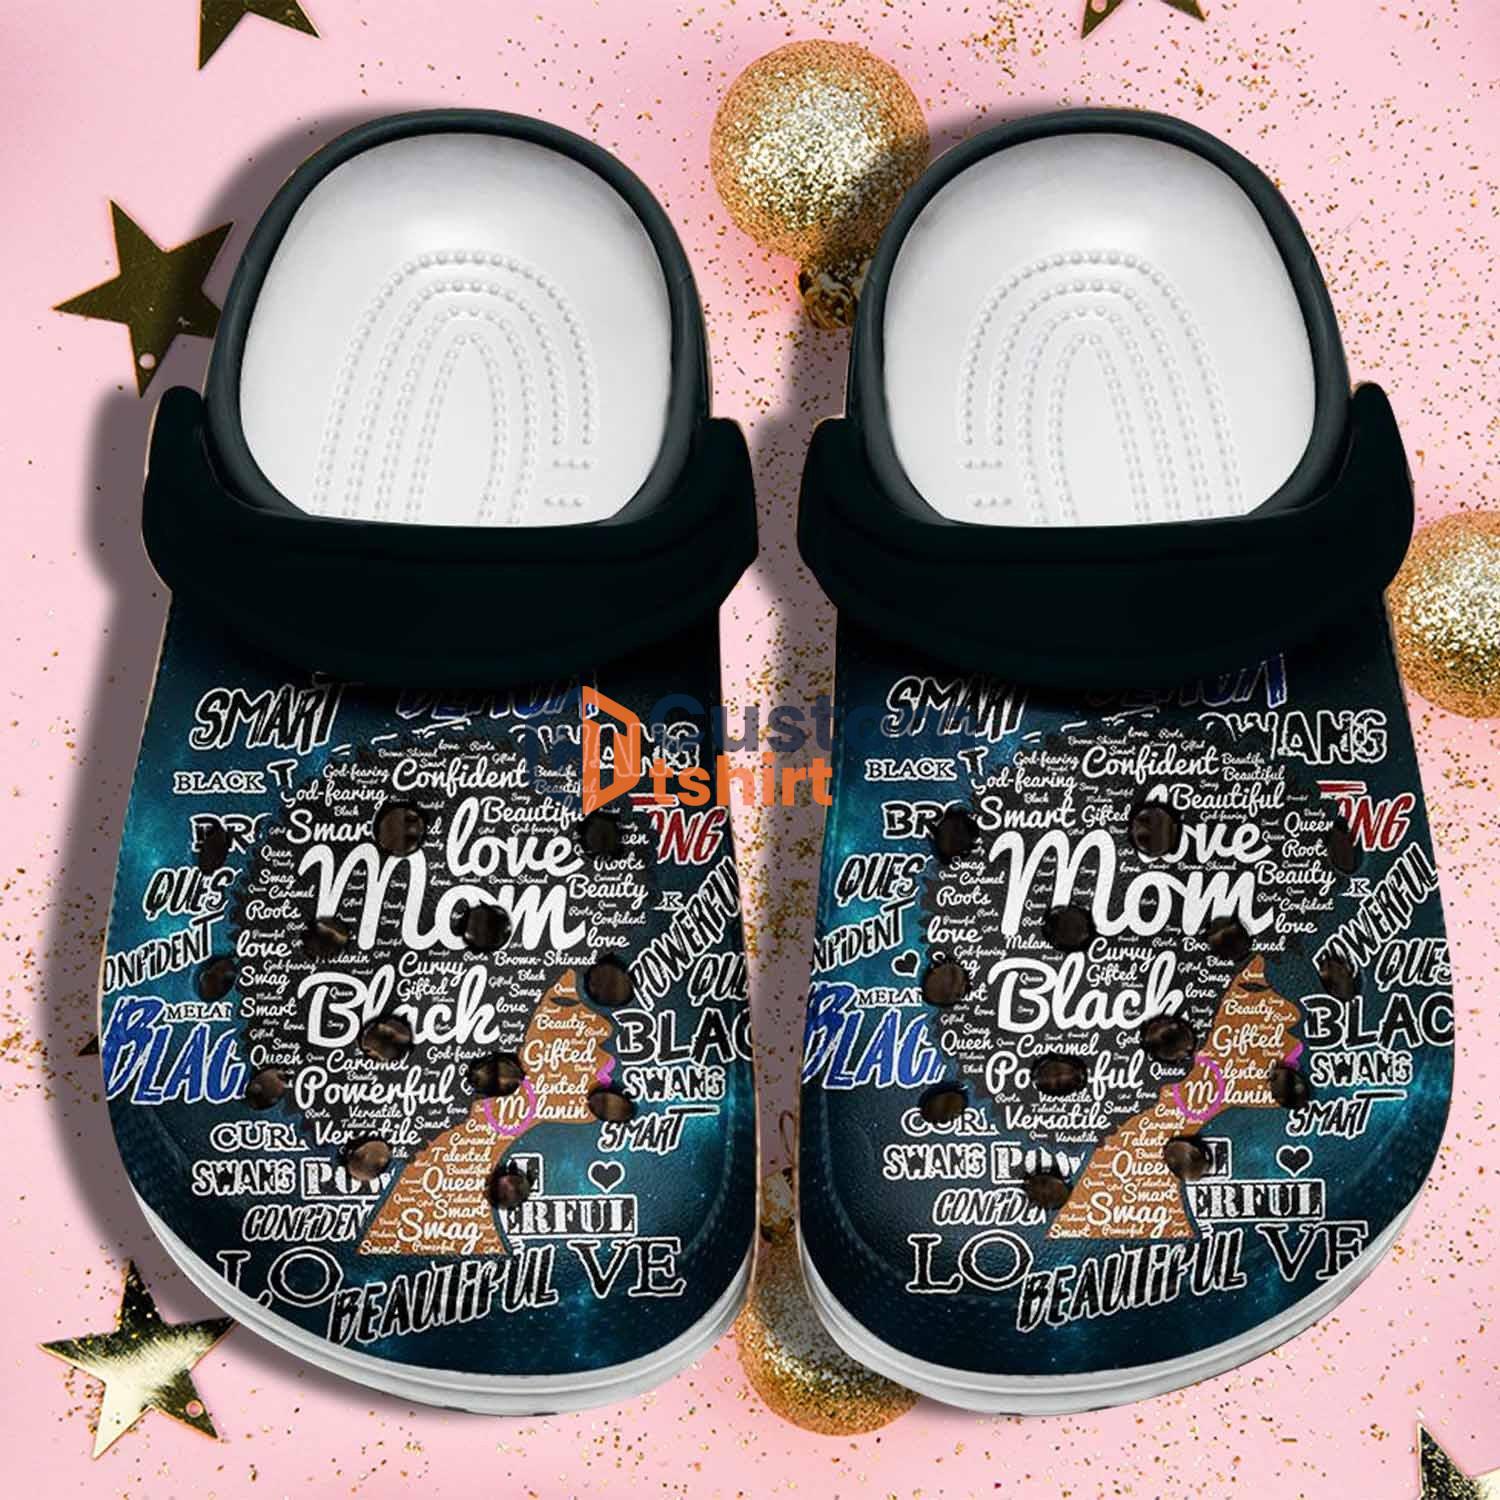 Mom Black Clog Shoes For Black Mom Mothers Day - Beautiful Hair Black Women Clog Shoes Gifts Grandma Product Photo 1 Product photo 1